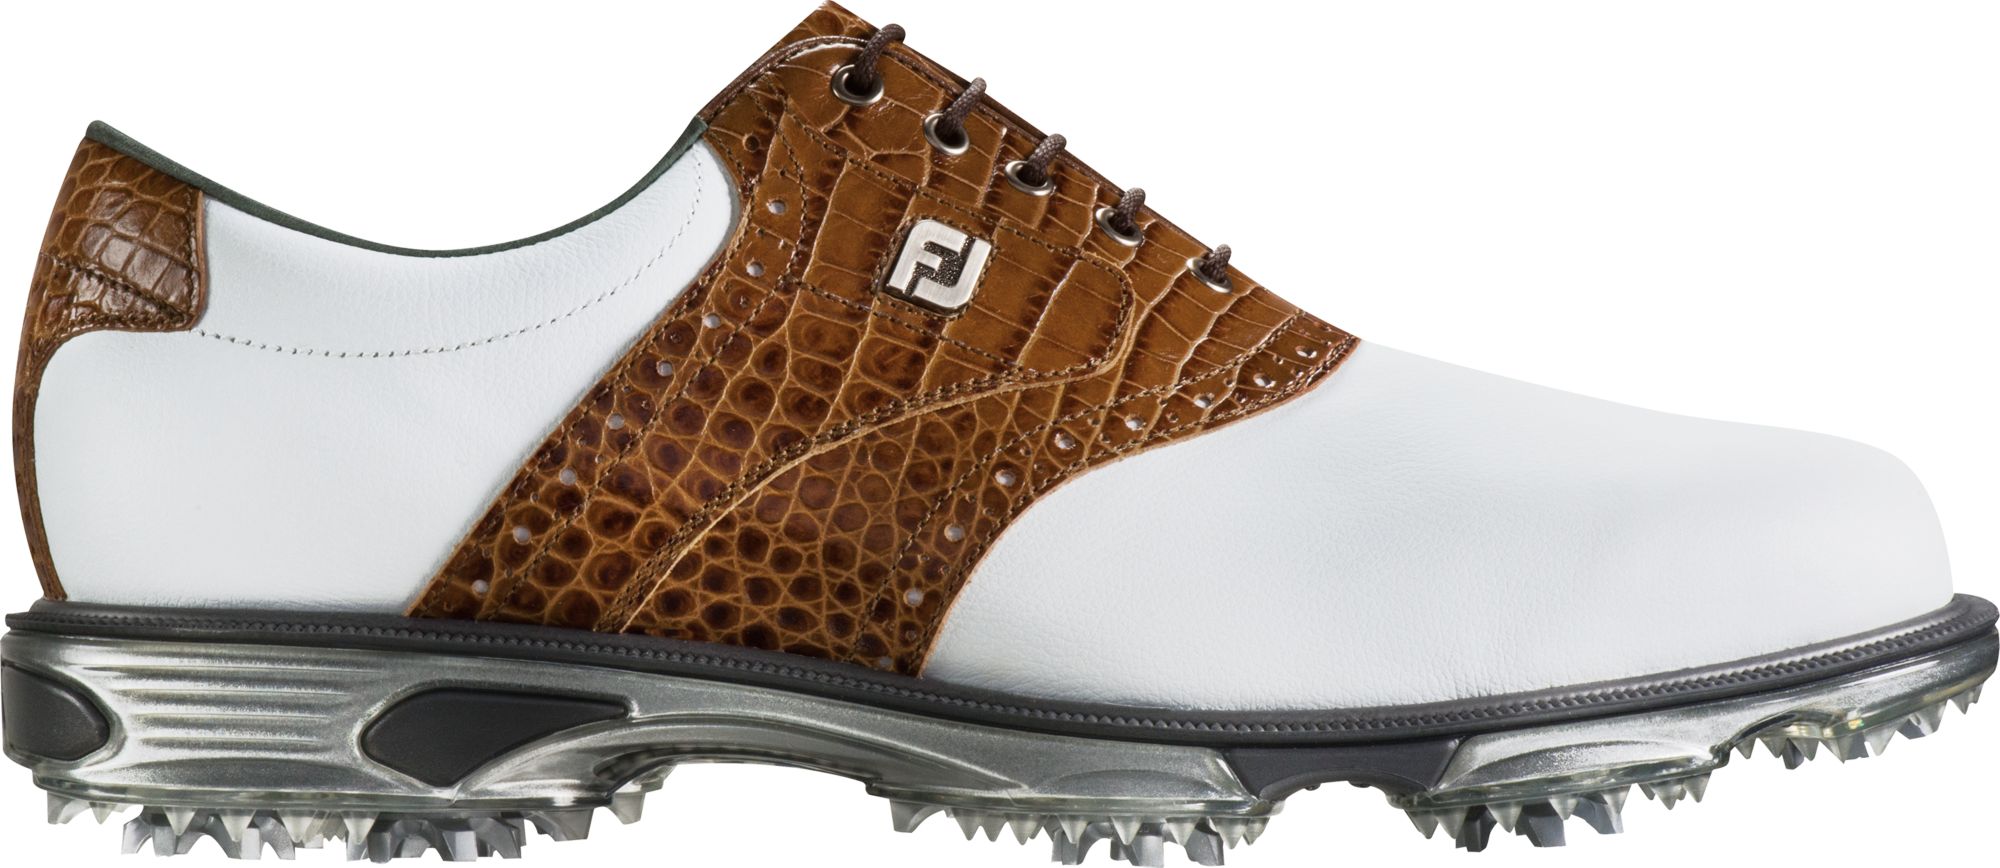 Spiked Golf Shoes For Men | Golf Galaxy